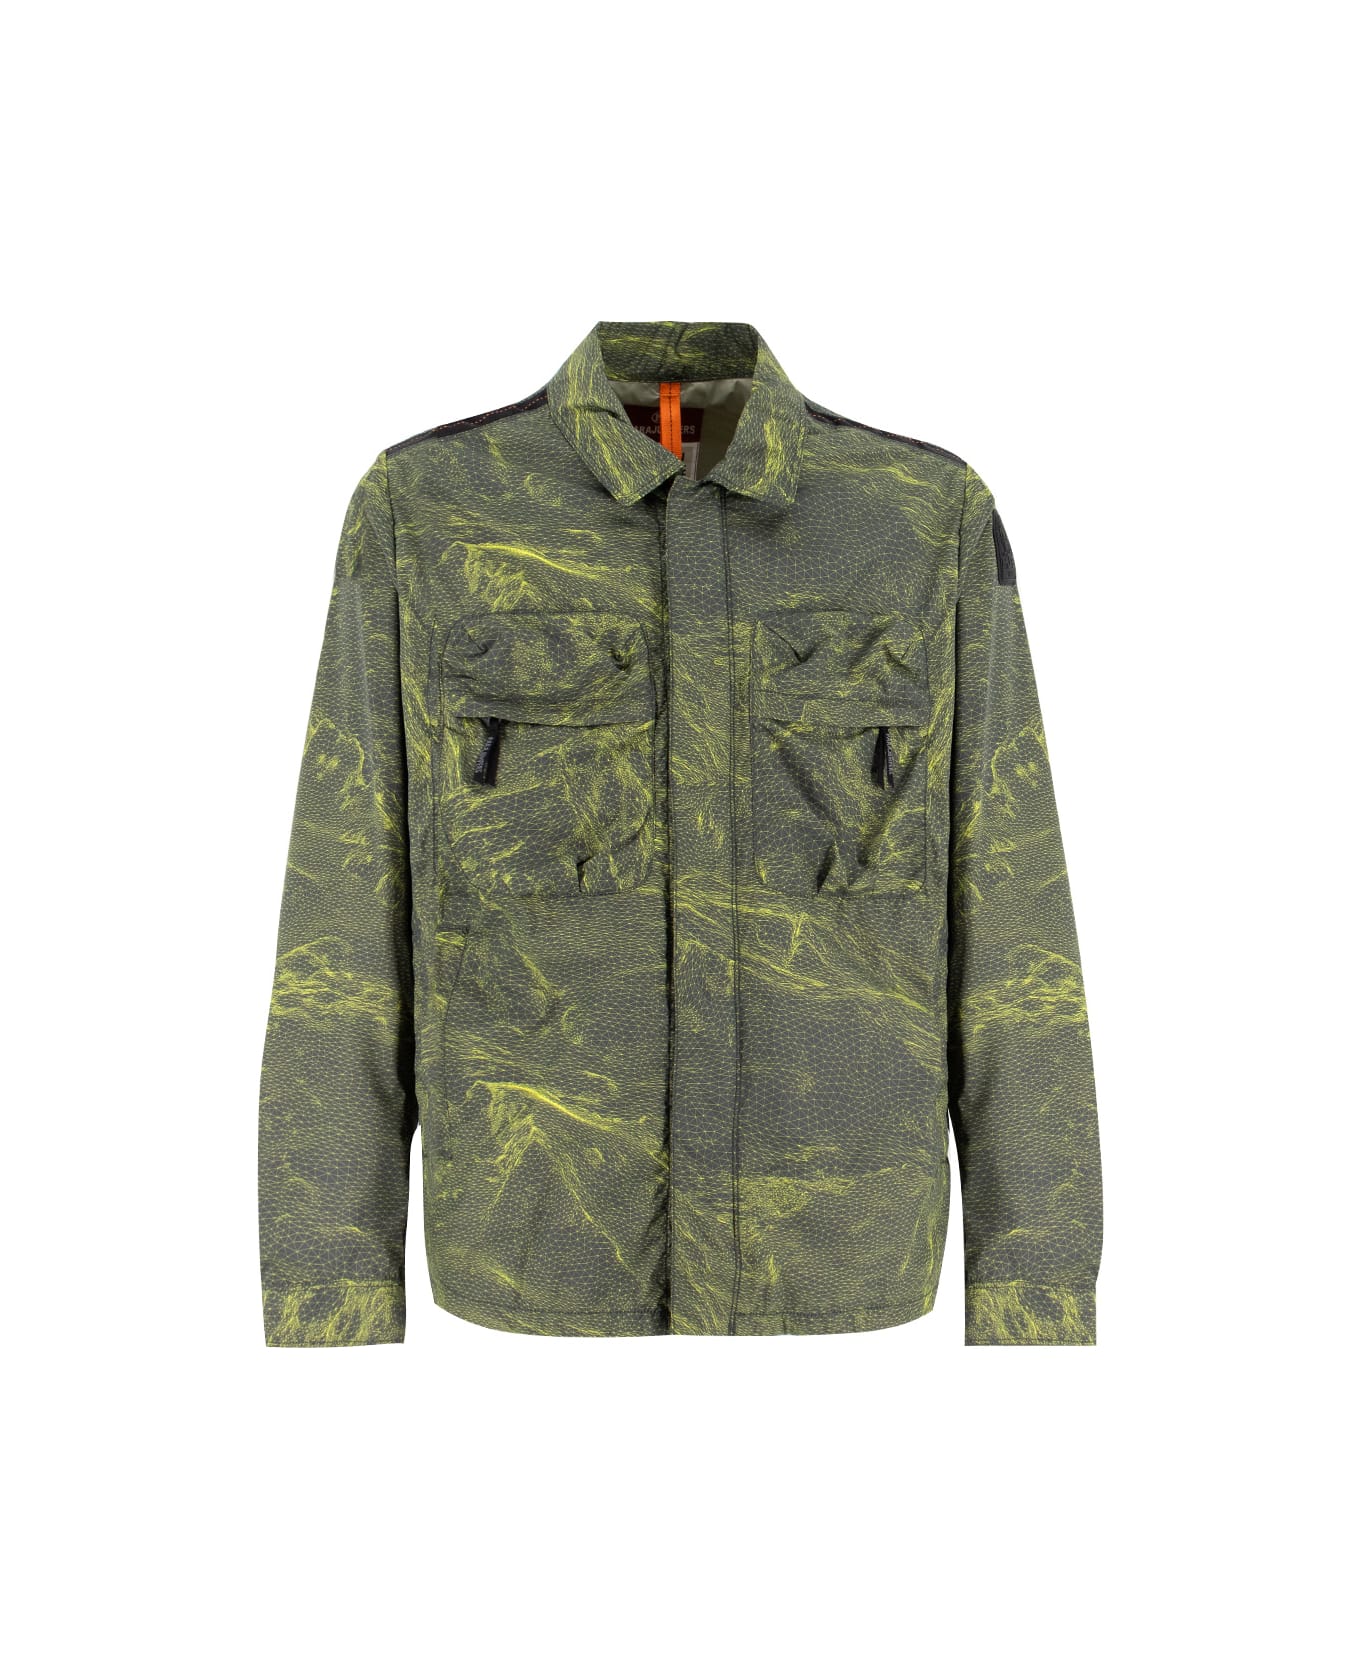 Parajumpers Jacket - TOUBRE WIREFRAME PRINT